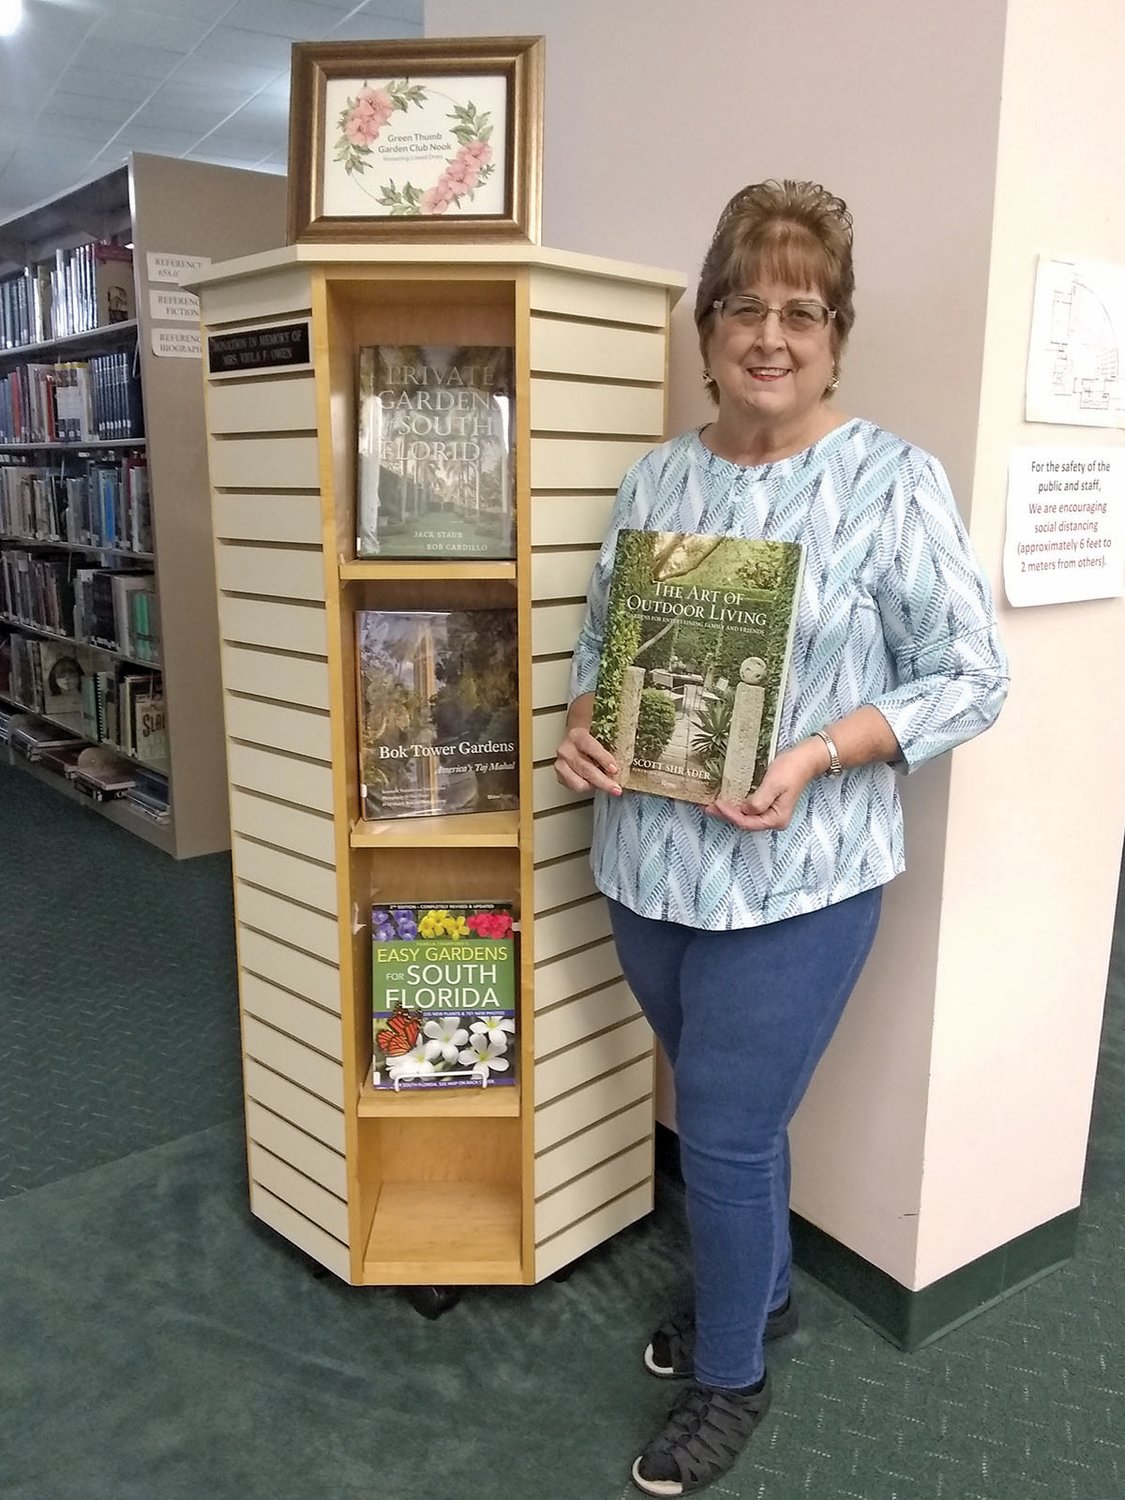 CLEWISTON — Margo Fatzinger presented Clewiston Public Library with a donation of the book "The Art of Outdoor Living: Gardens Gardens for Entertaining Family and Friends" by Scott Shrader.